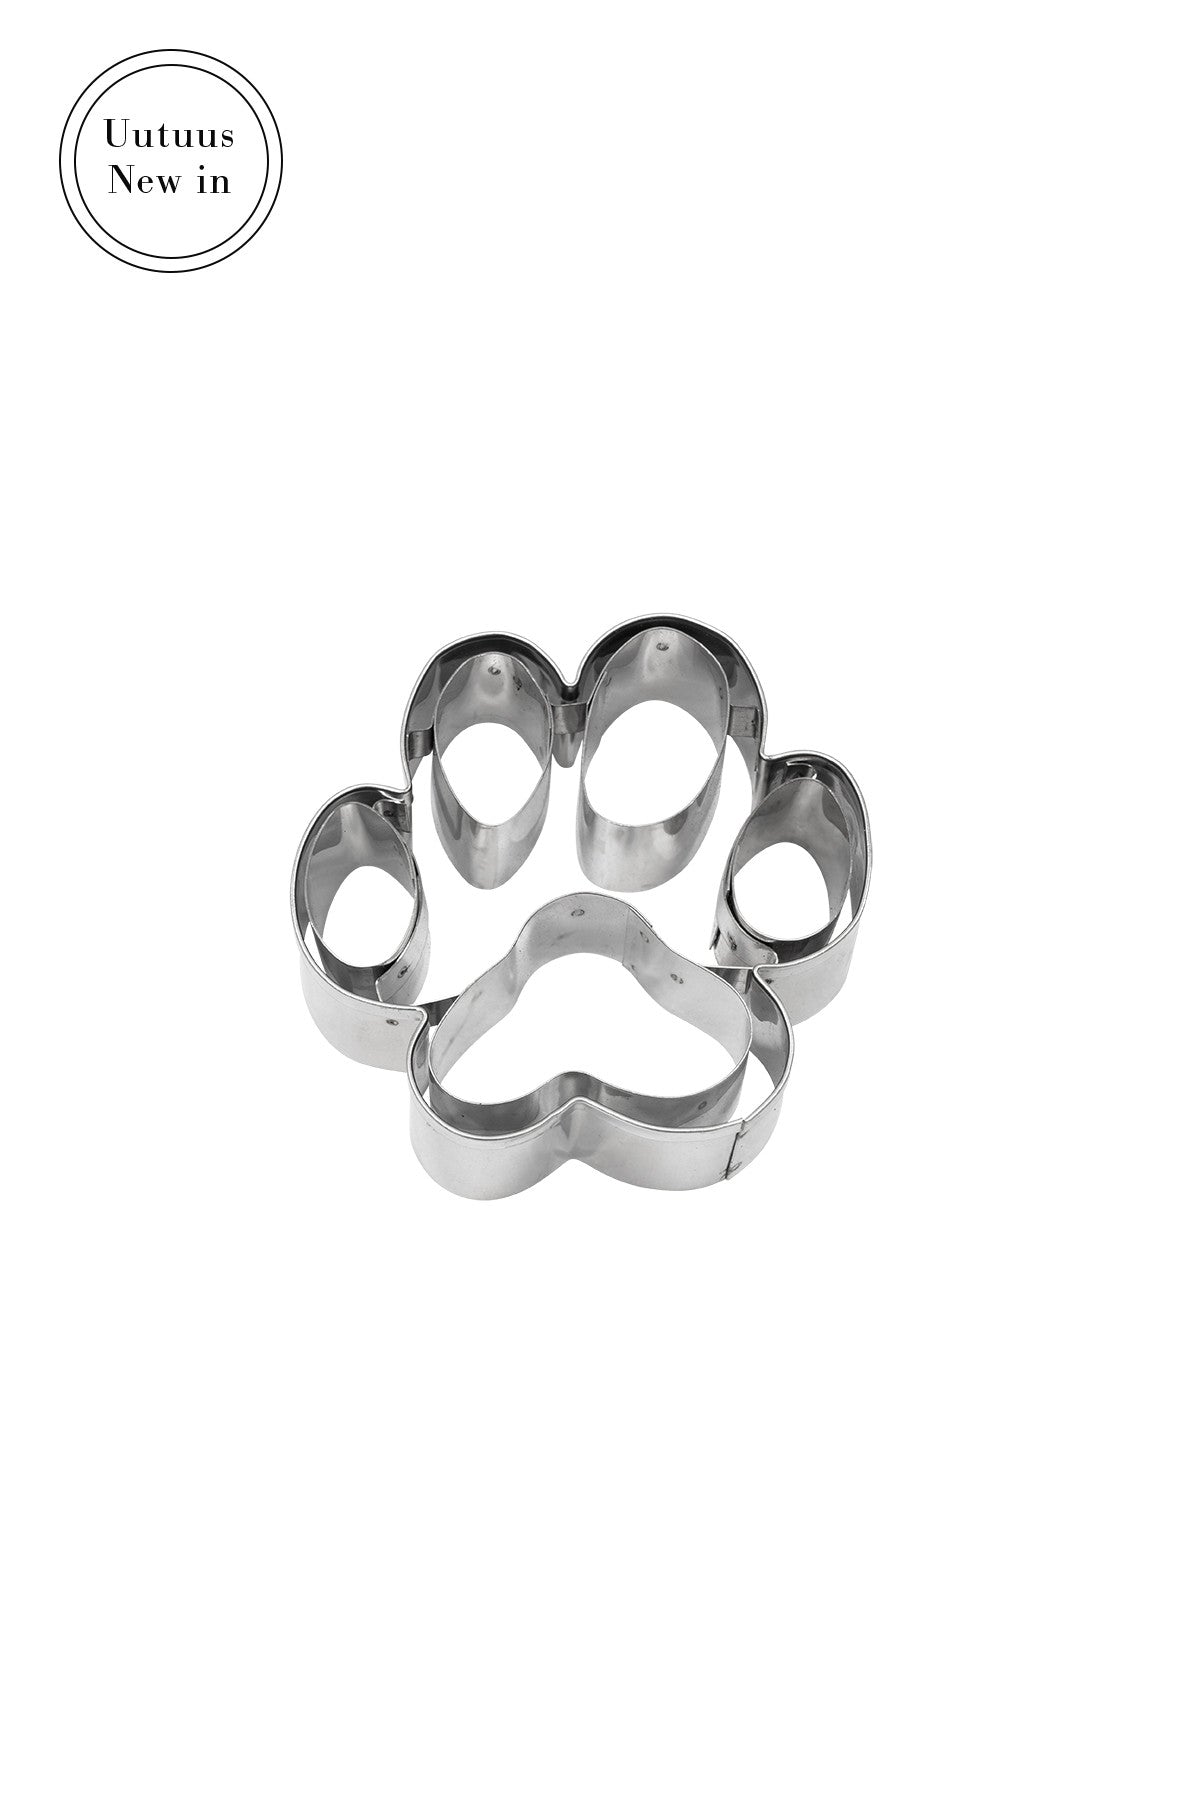 PAW 7 cm COOKIE CUTTER